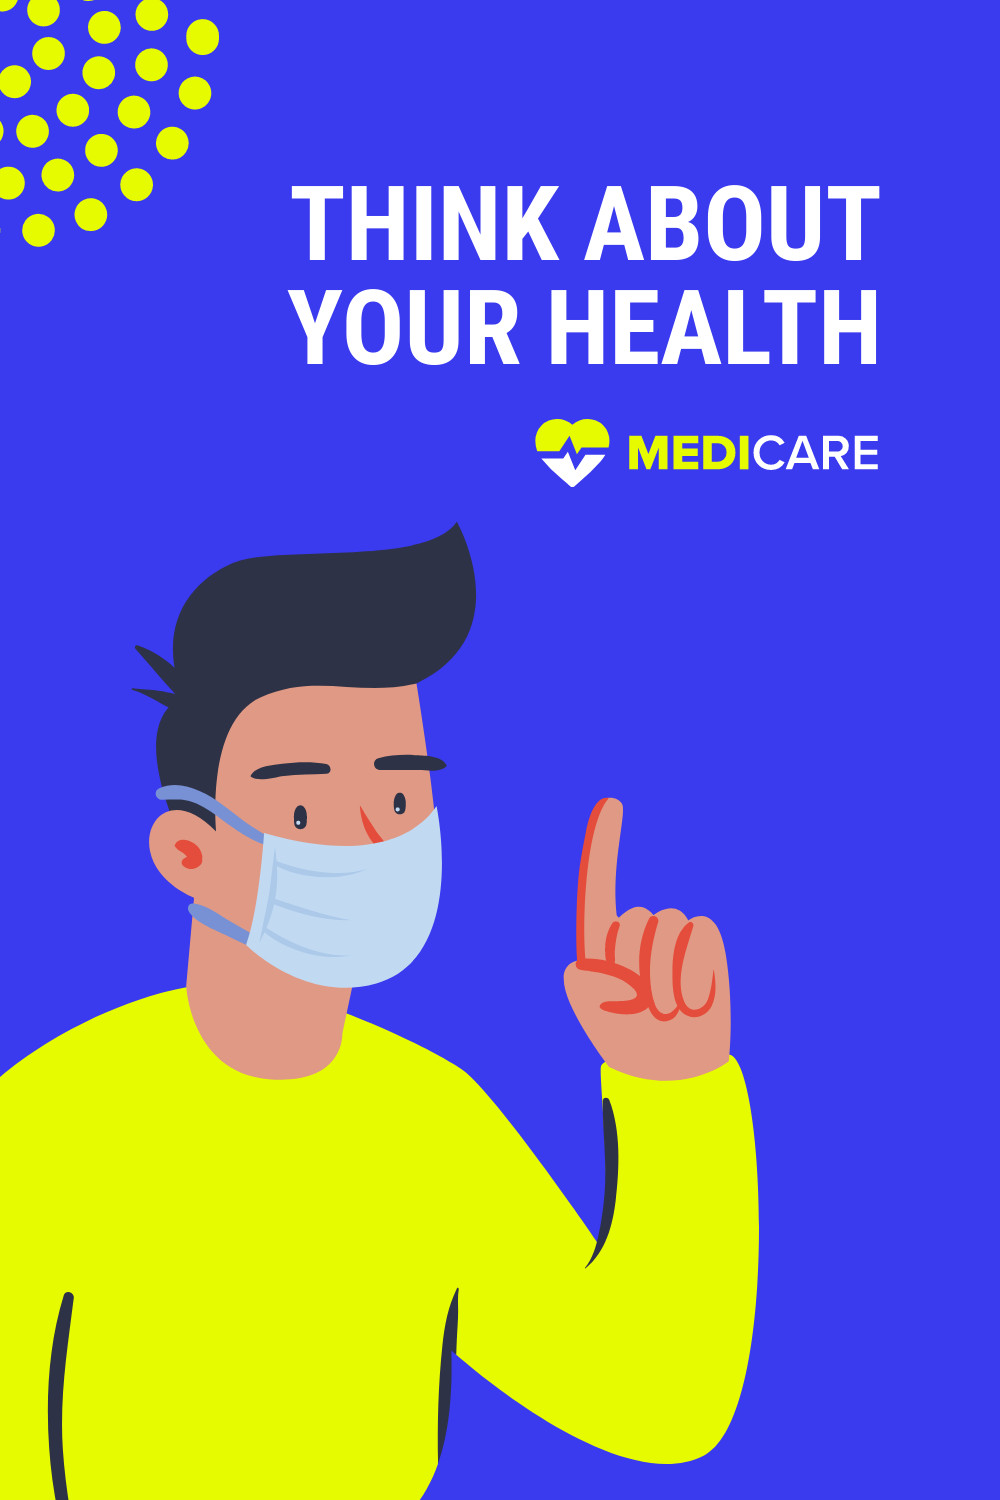 Medicare Think About Your Health  Inline Rectangle 300x250